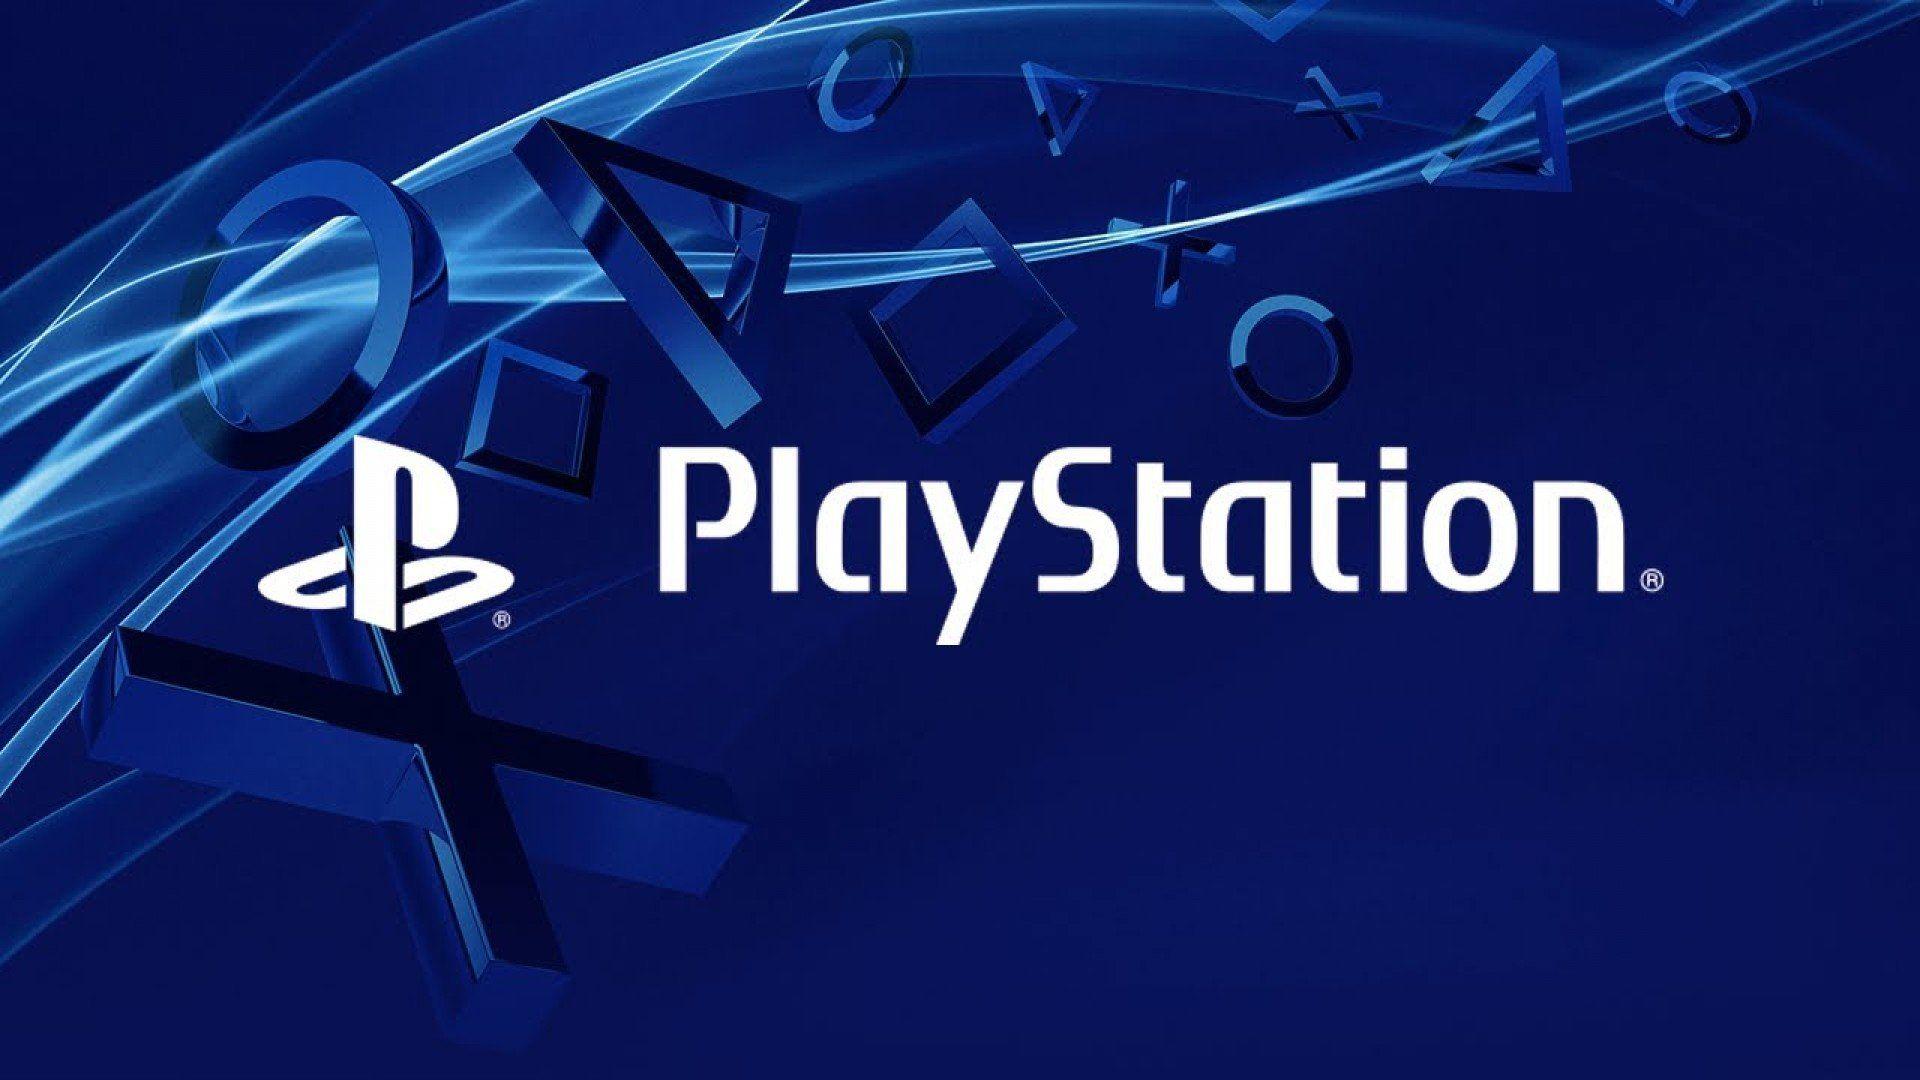 Playstation Full HD Wallpaper and Background Imagex1080